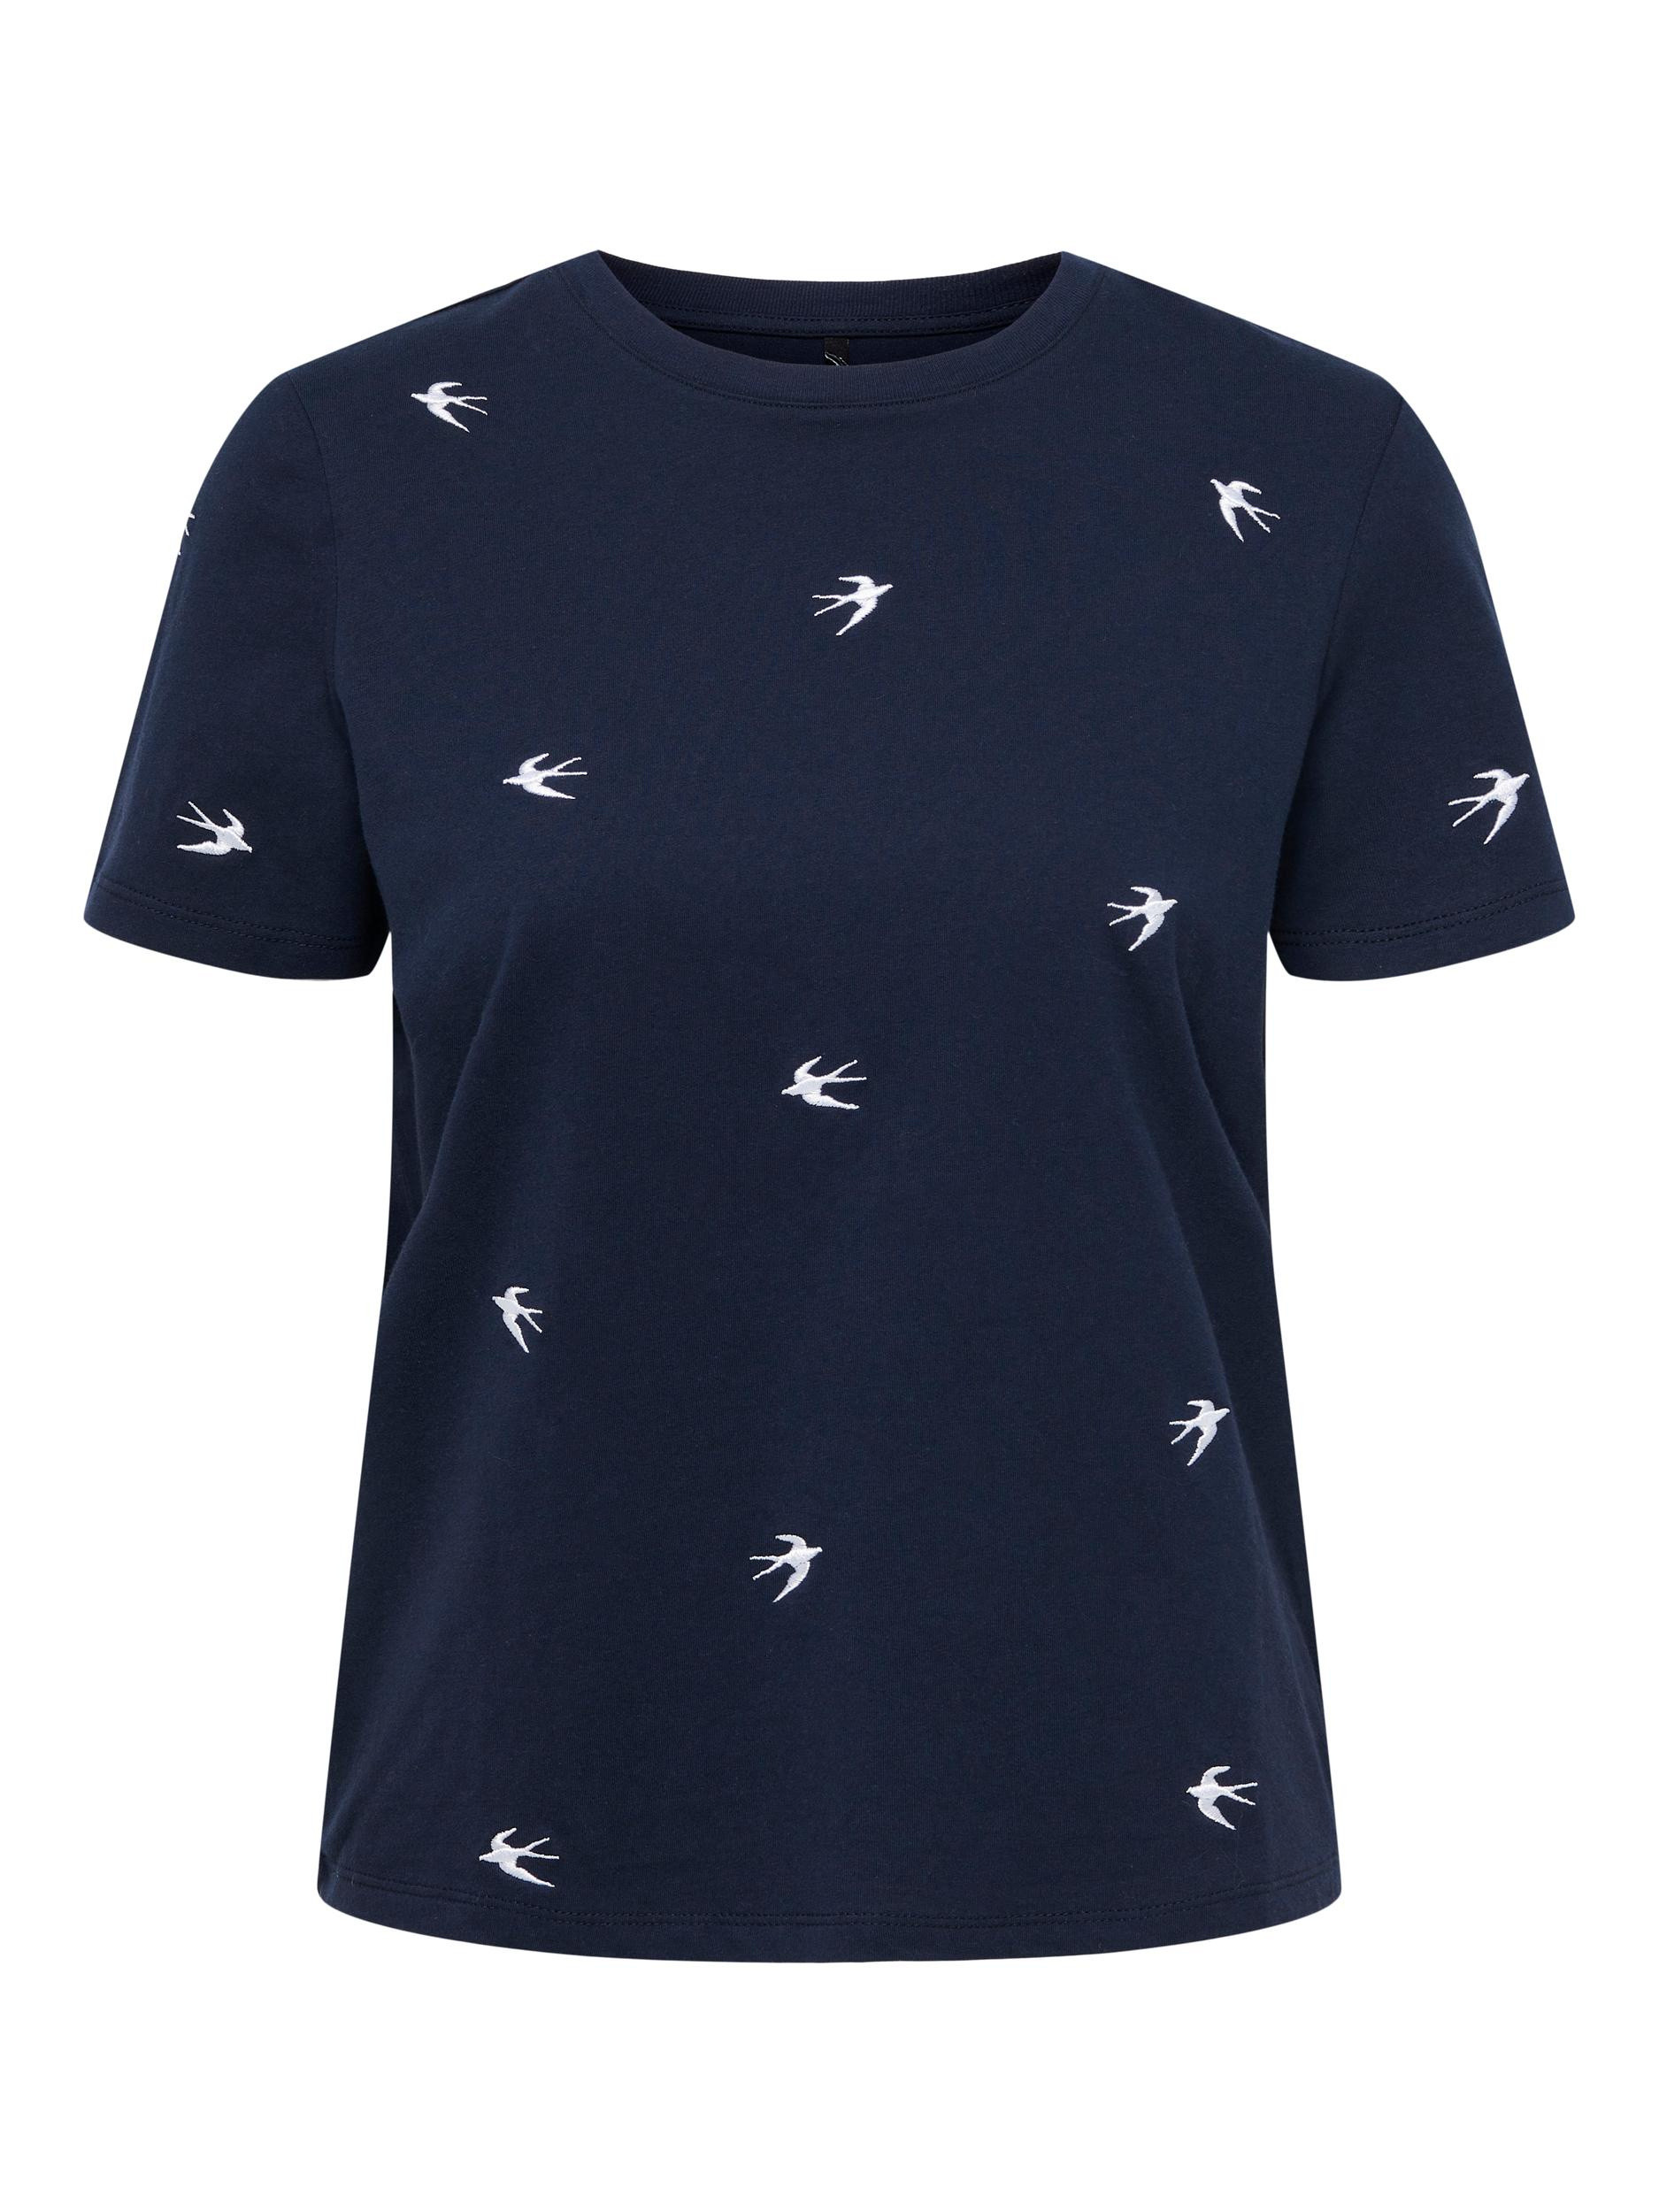 Only - Regular fit T-shirt with print, Dark Blue, large image number 0